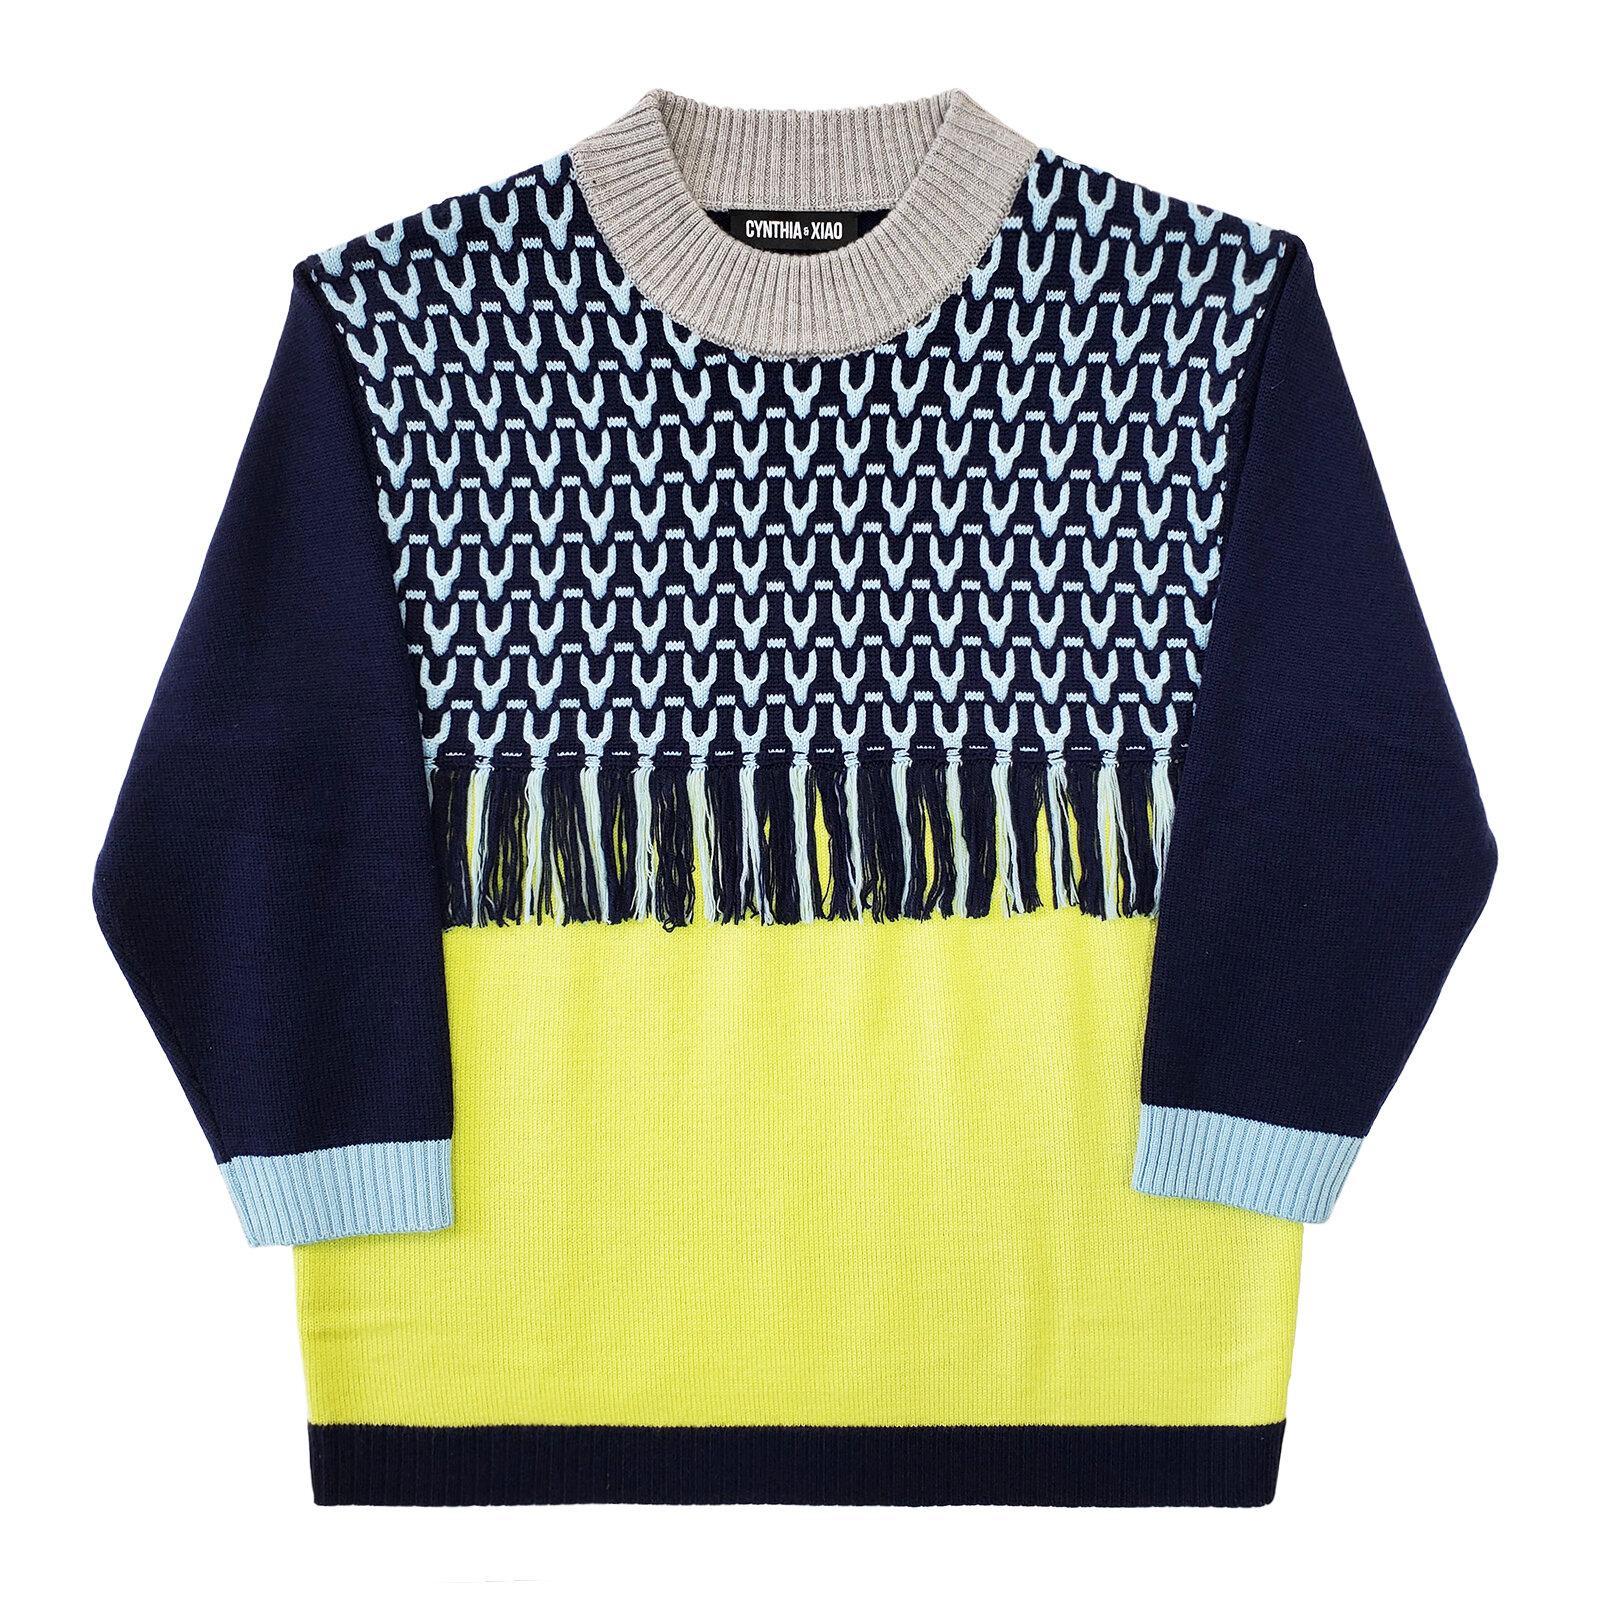 navy cable oversize knit top knit sweater by CYNTHIA AND XIAO